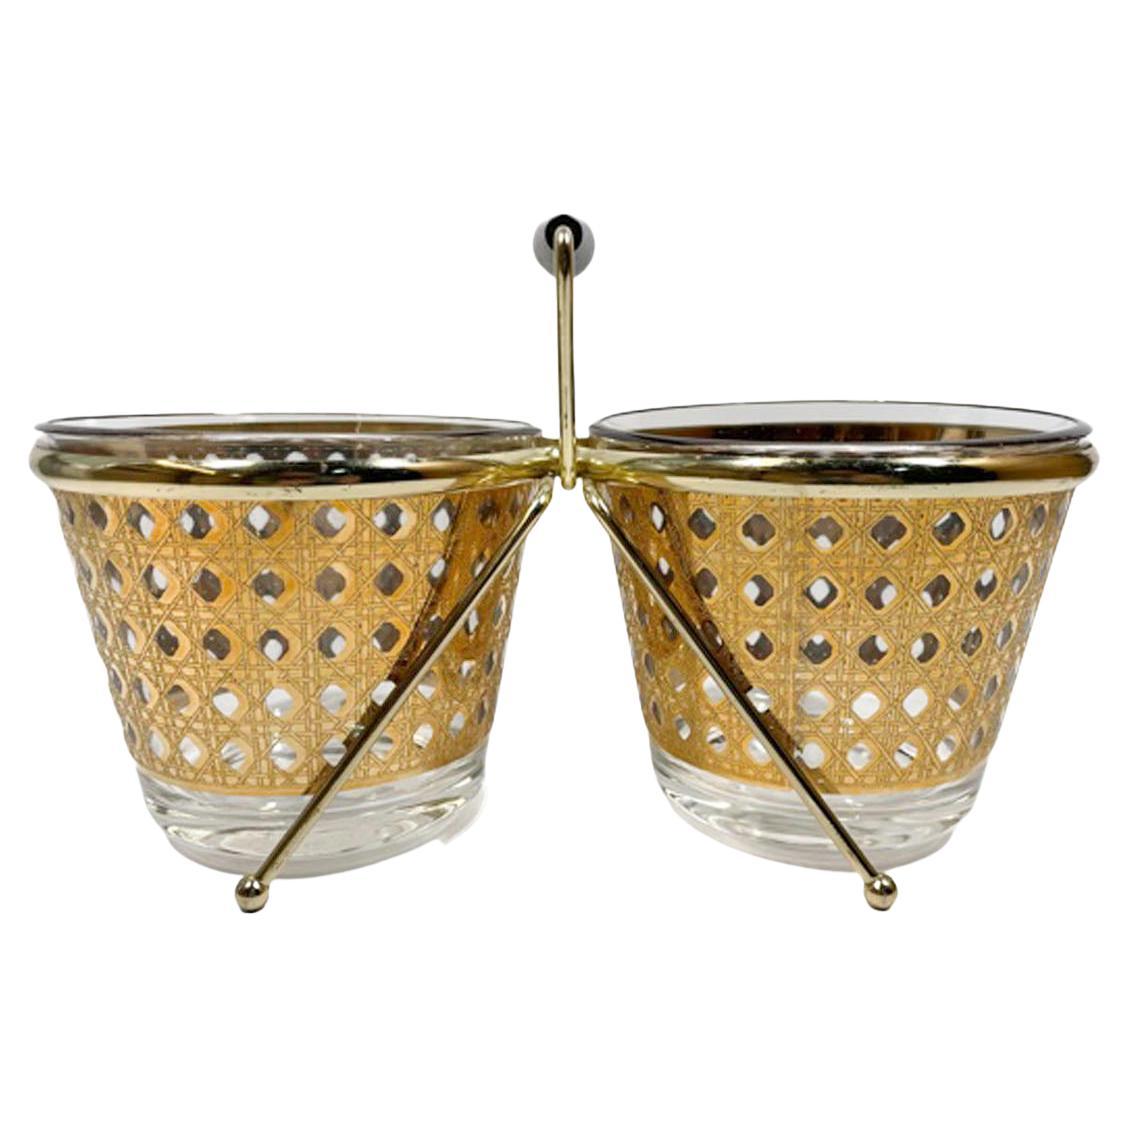 Unusual Vintage Culver Double Ice Bowls in the Canella Pattern with Metal Caddy